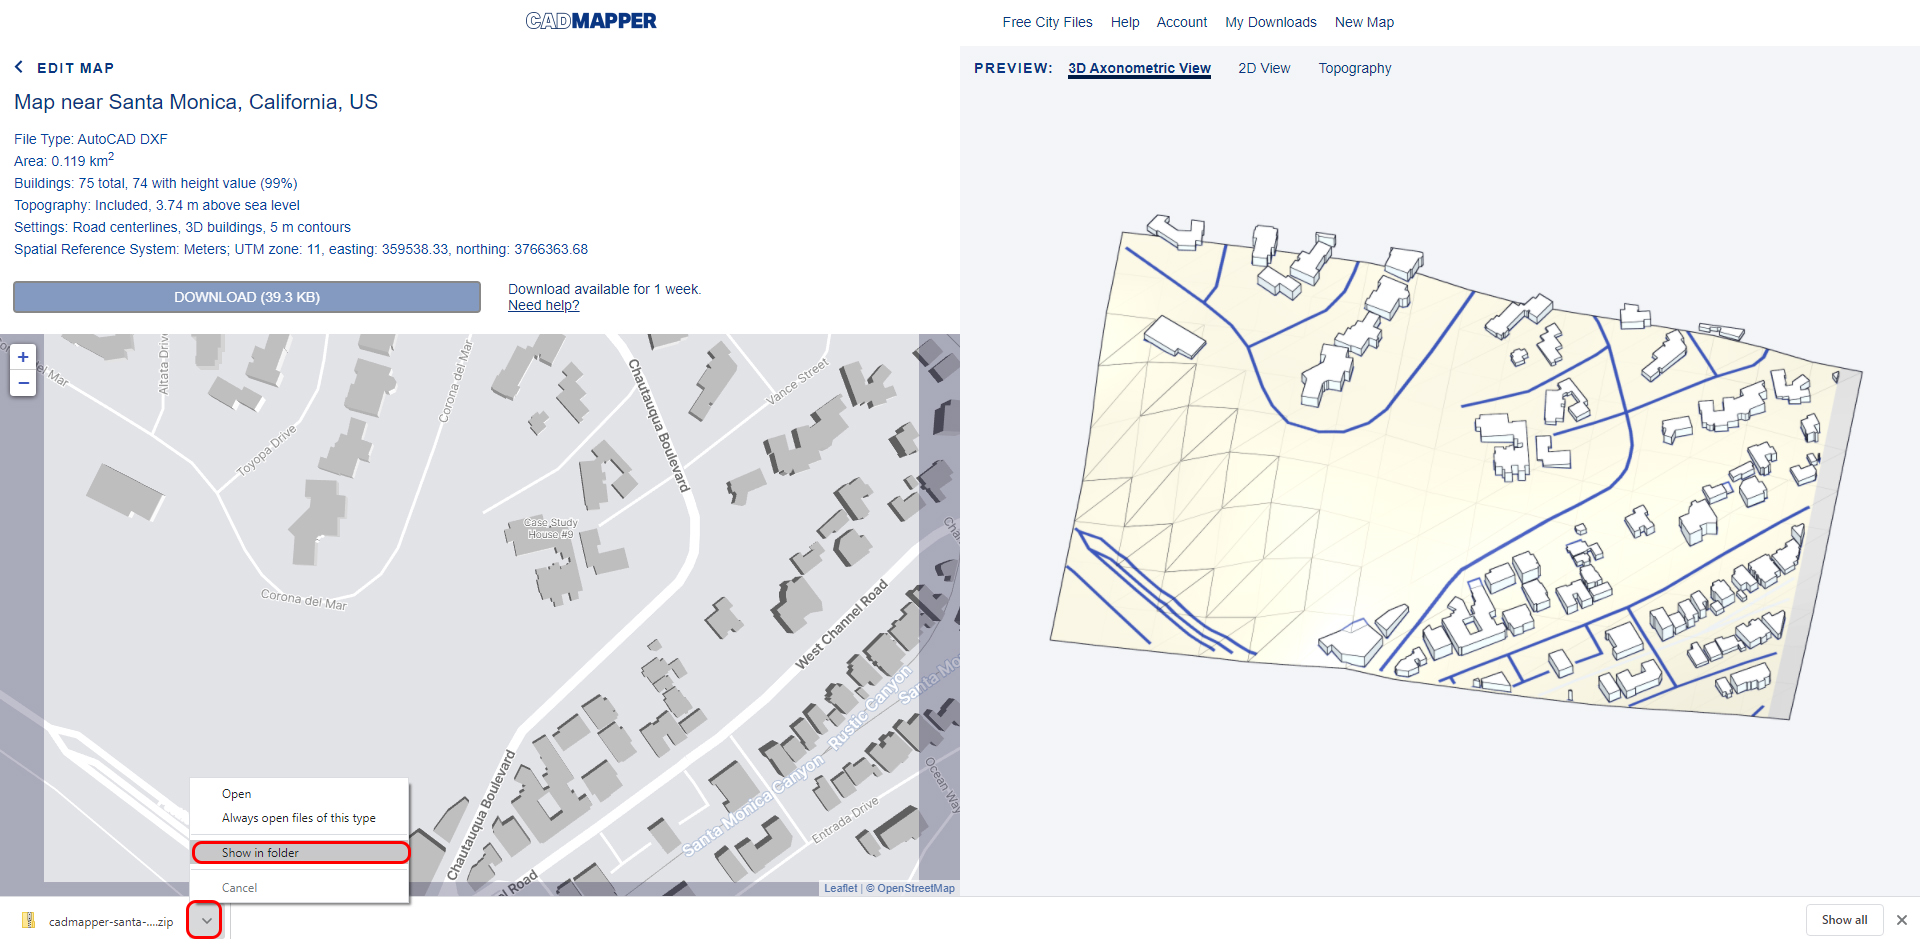 This image shows the CAD mapper website for the Eames house project and how to open the downloaded folder.